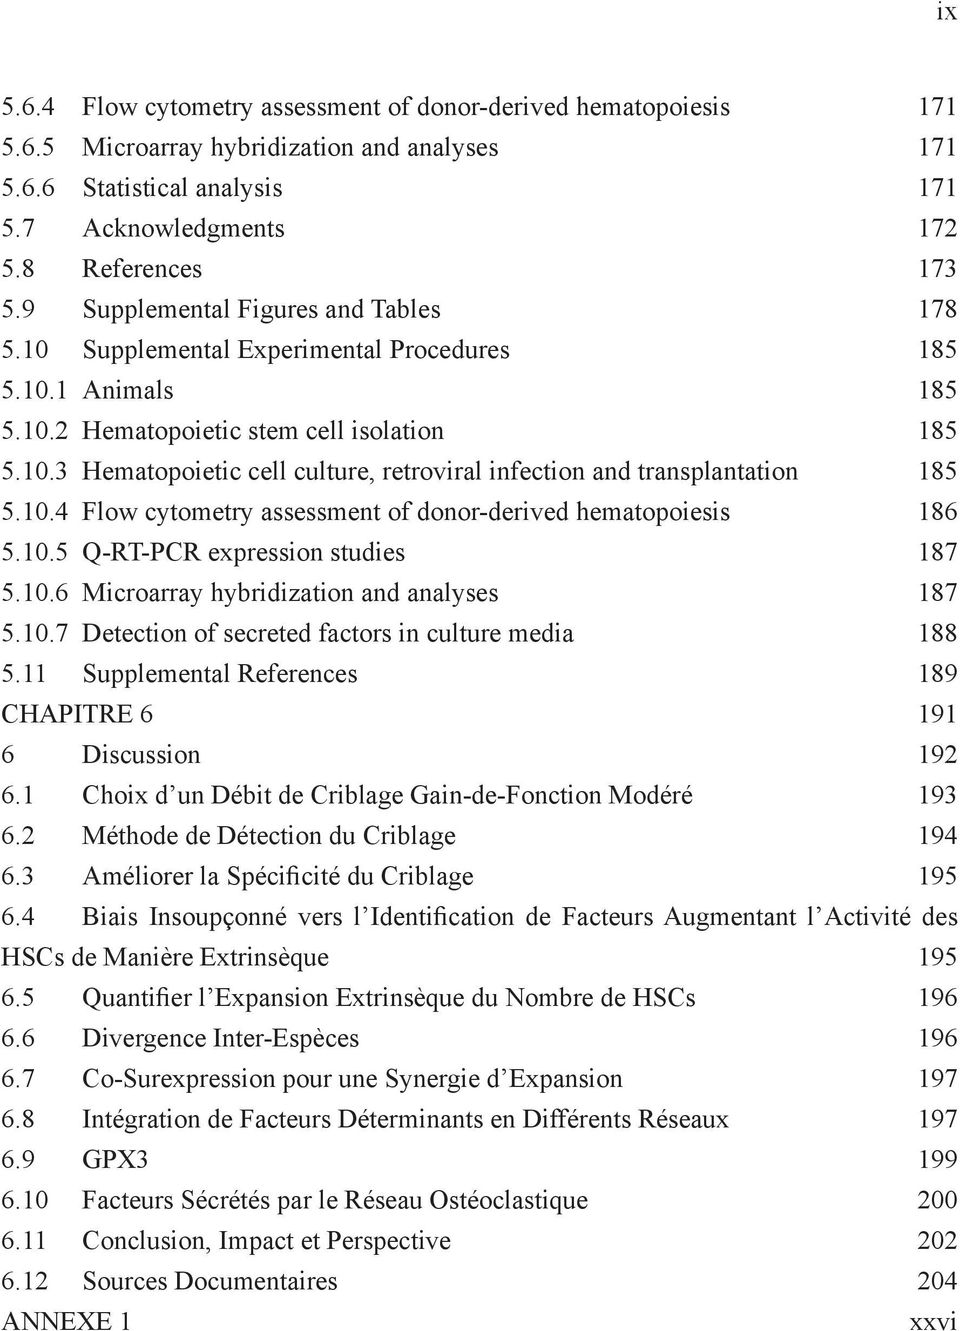 10.4 Flow cytometry assessment of donor-derived hematopoiesis 186 5.10.5 Q-RT-PCR expression studies 187 5.10.6 Microarray hybridization and analyses 187 5.10.7 Detection of secreted factors in culture media 188 5.